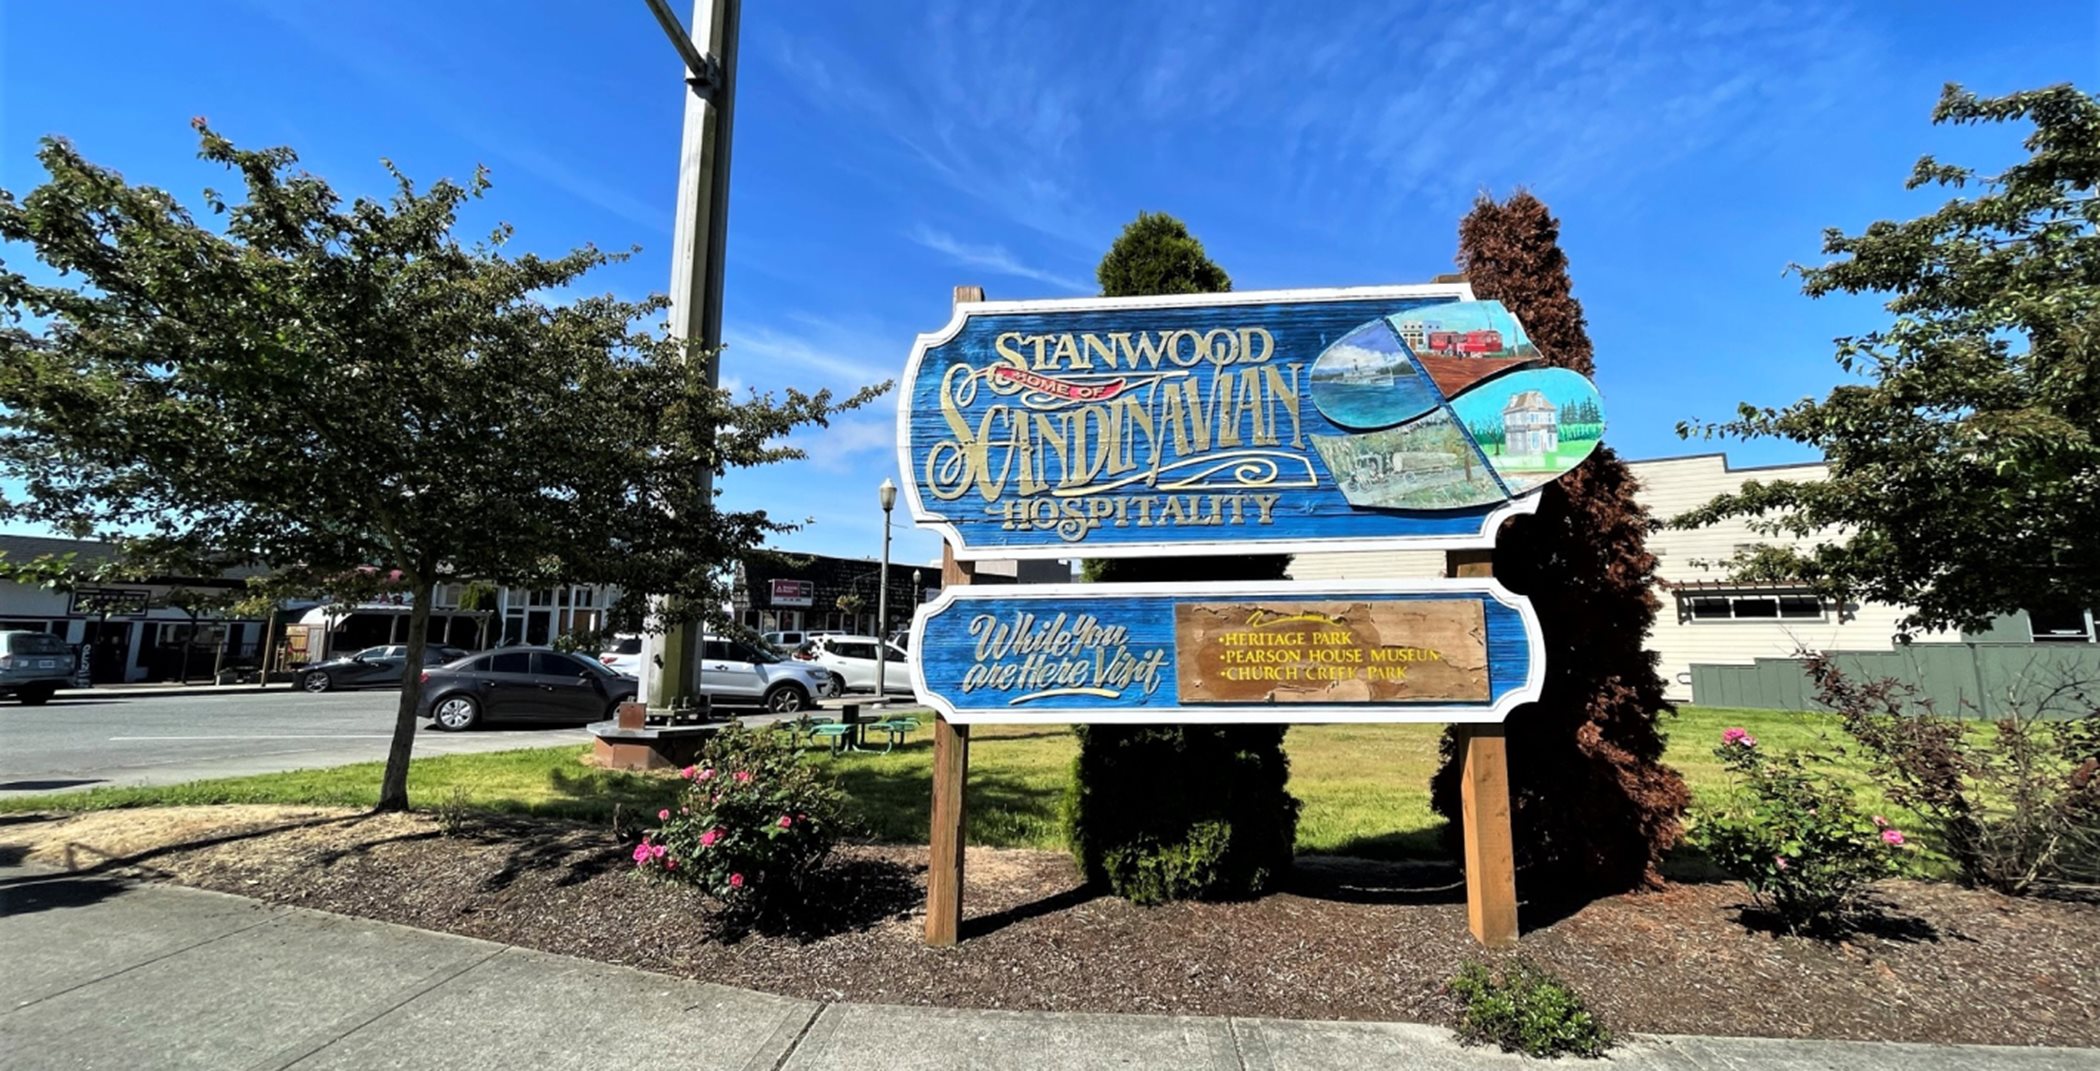 Stanwood welcome sign. It is blue with pale yellow cursive lettering. The sign reads:  Stanwood - Home of Scandinavian Hospitality